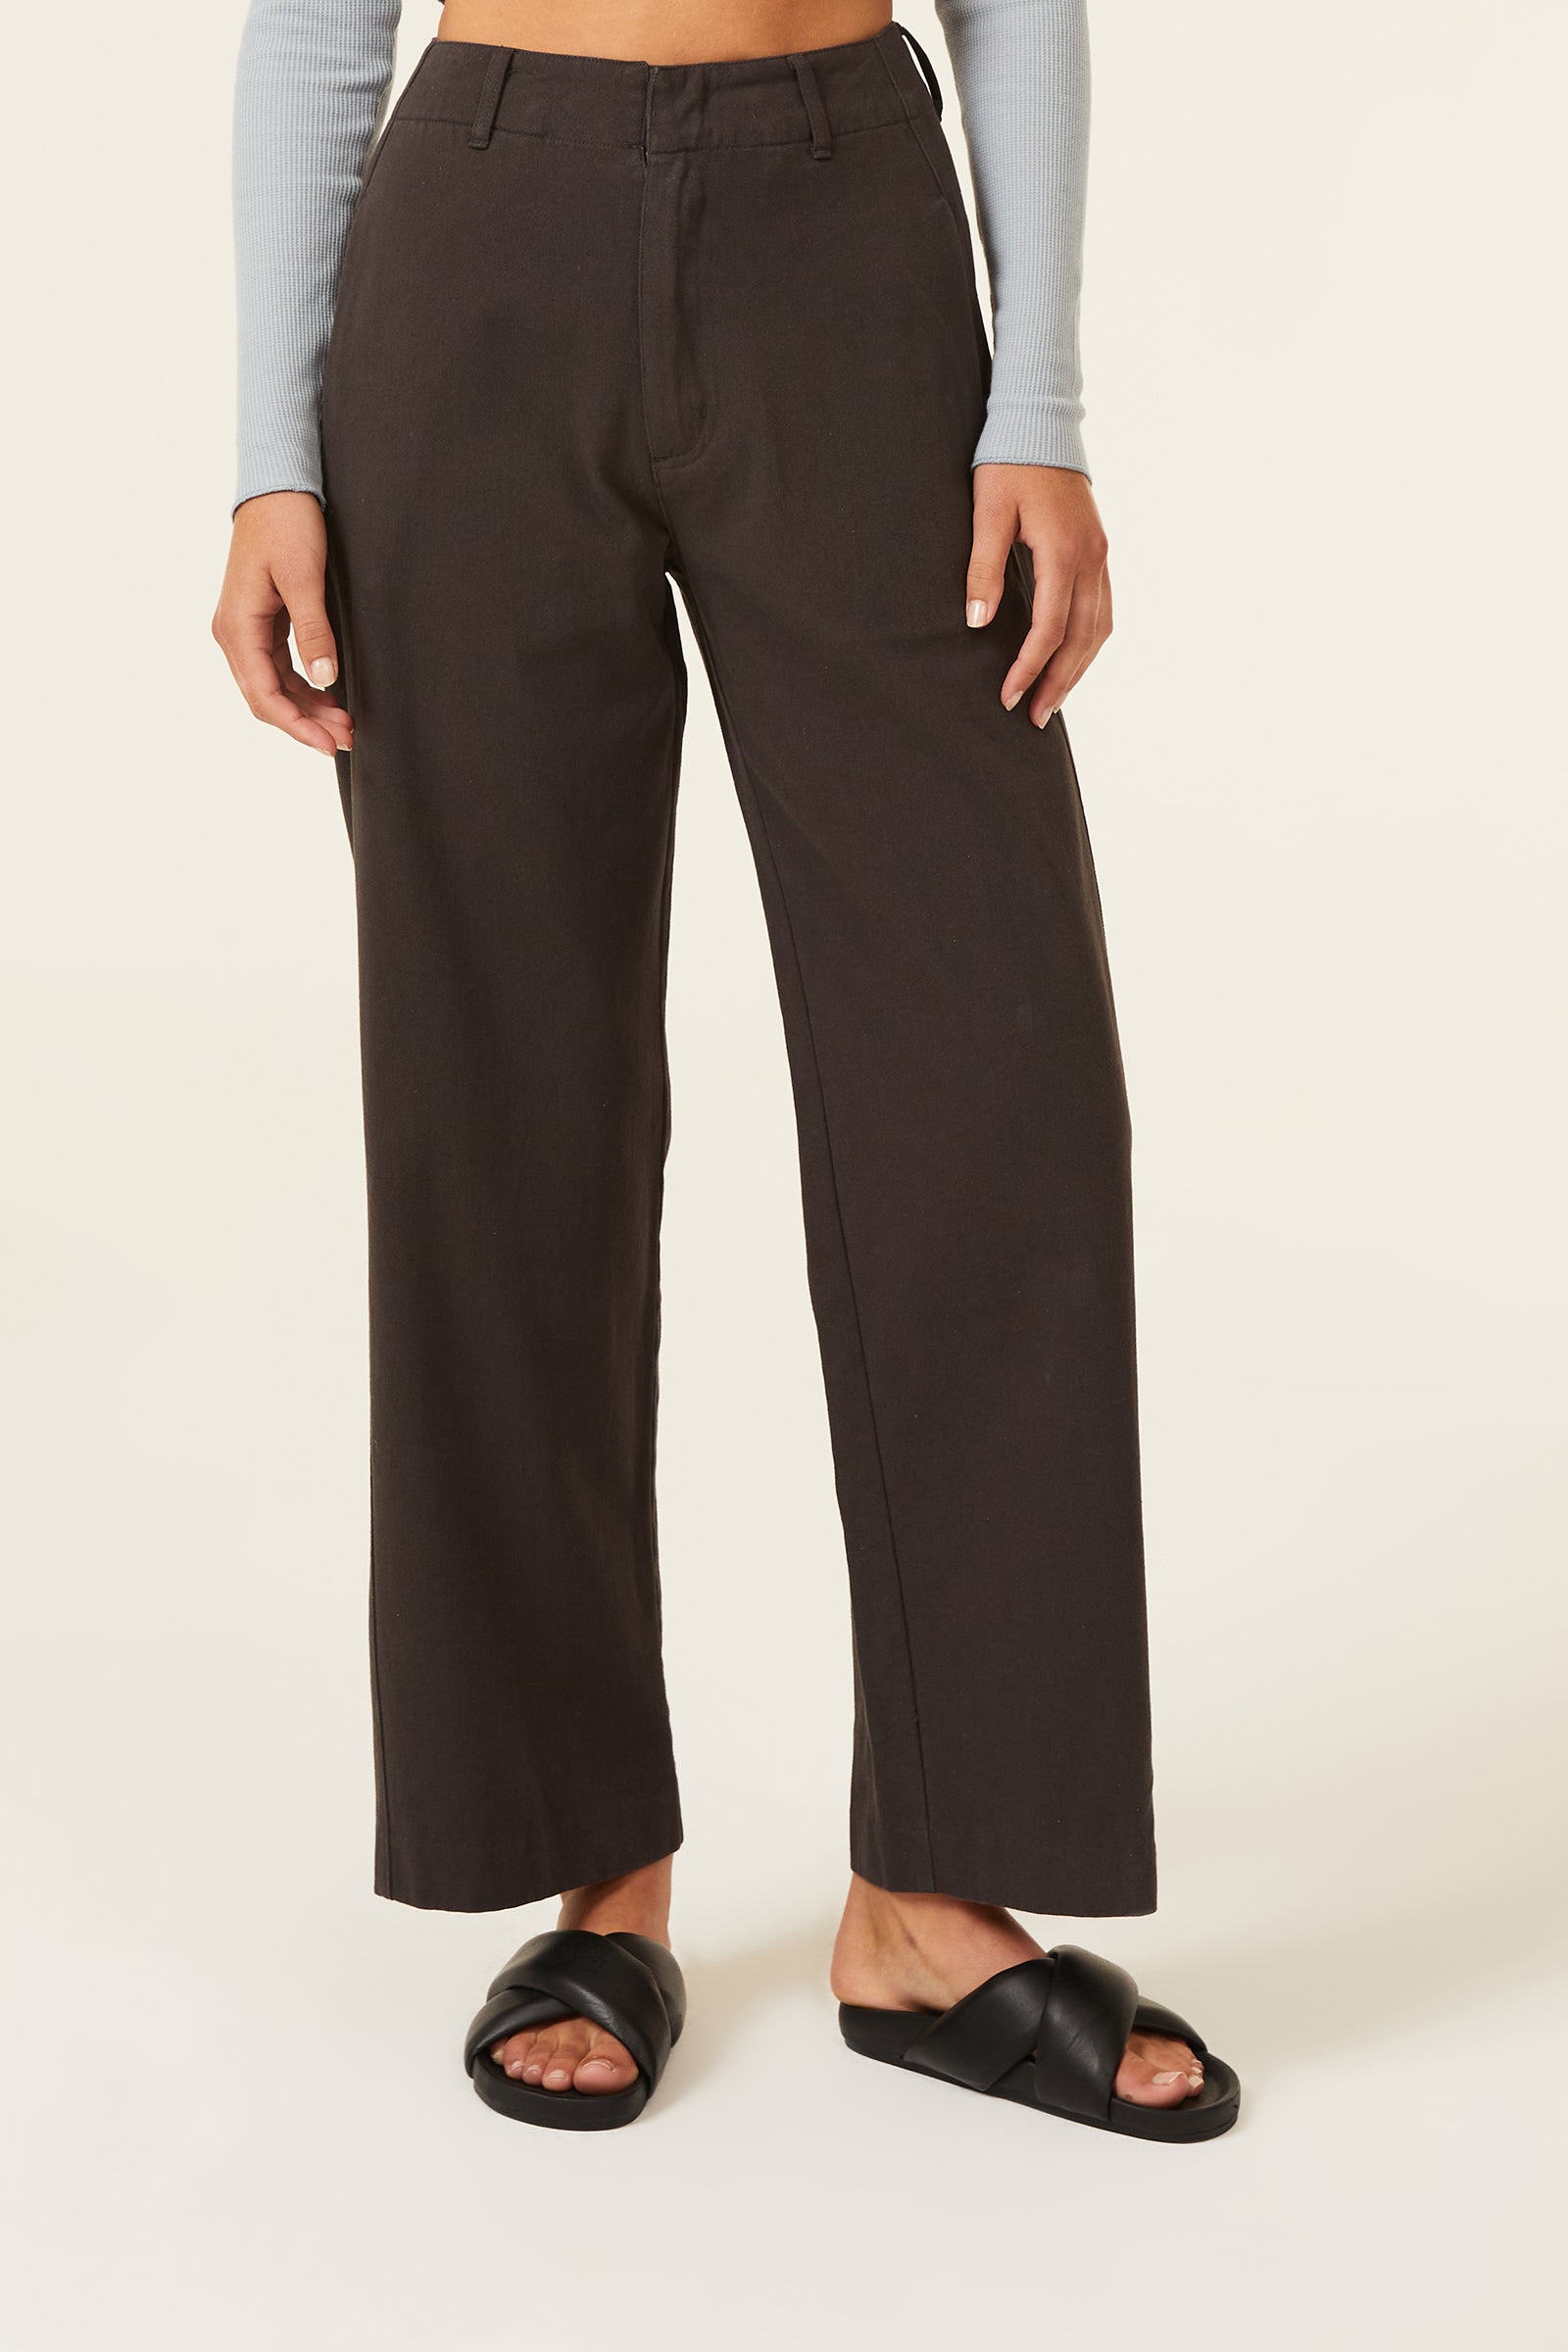 Nude Lucy Cooper Pant in a Dark Grey In a Brown Coal Colour